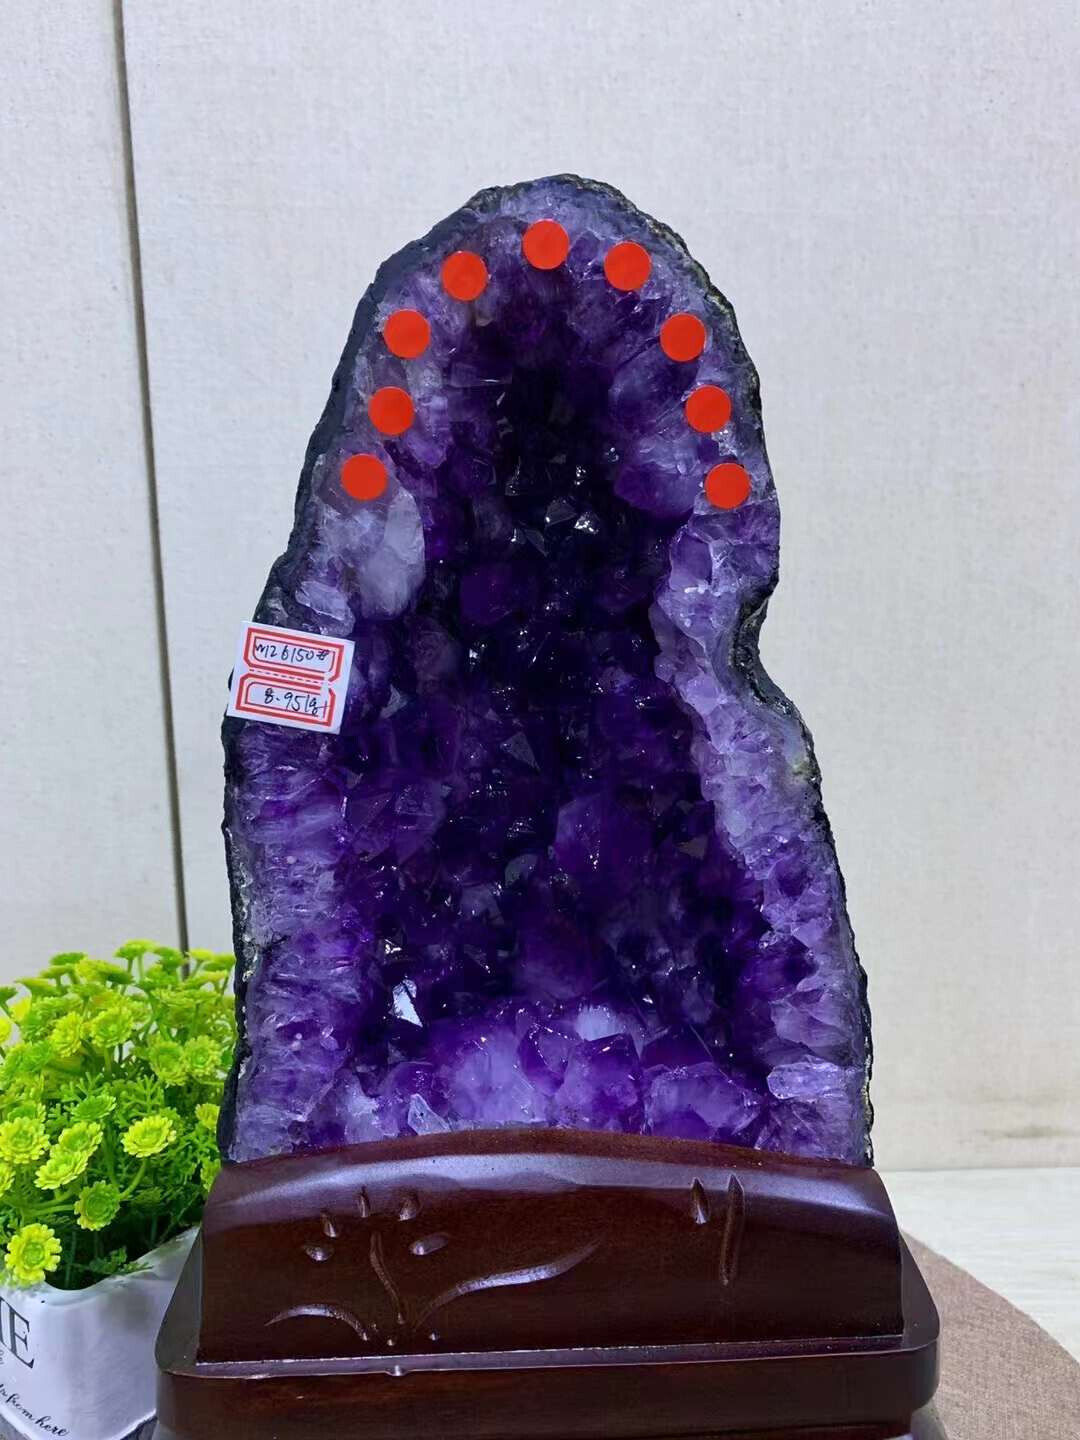 19.69LB Top Natural Amethyst Crystal Church Cathedral Geode Mineral Specimen